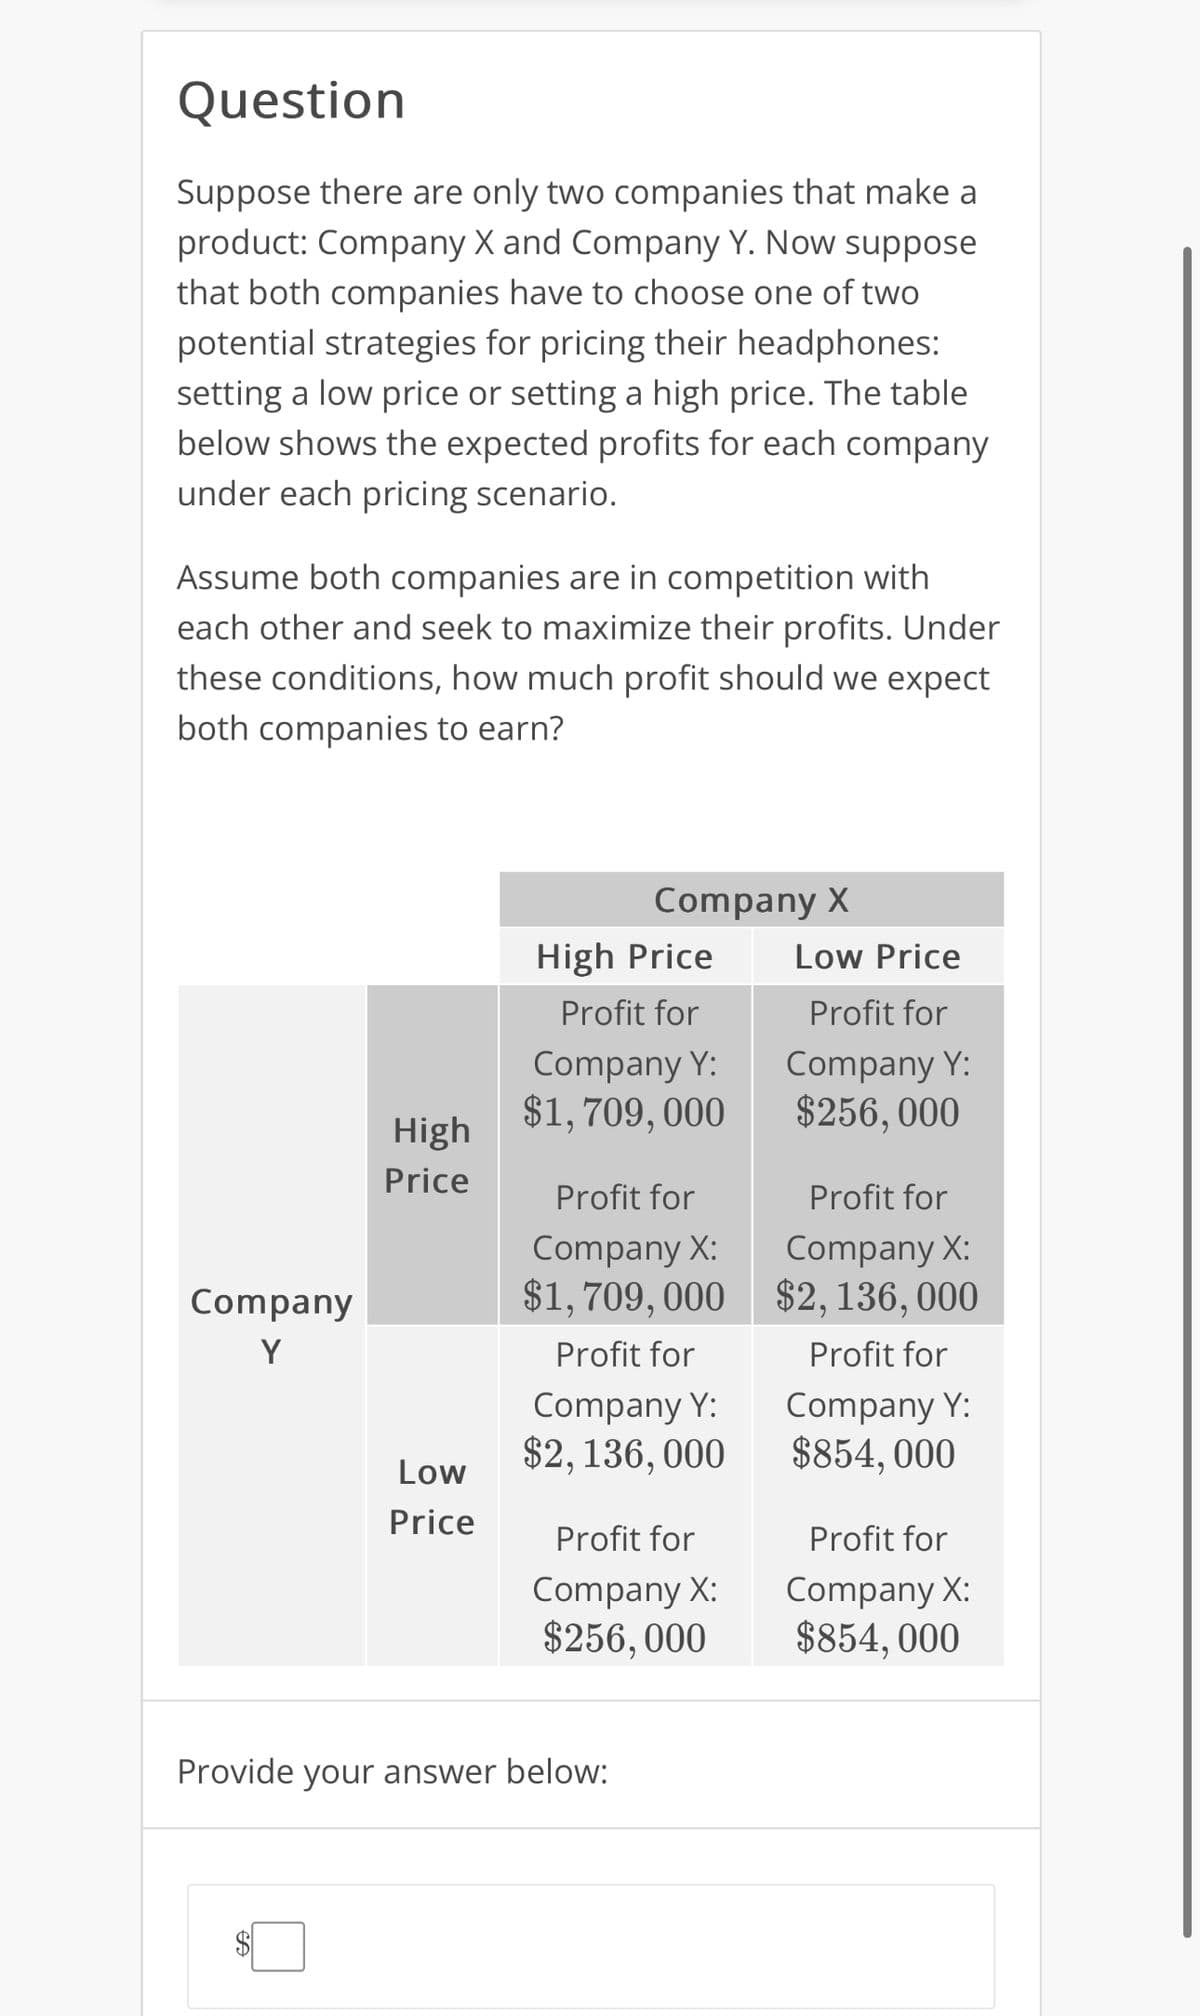 Question
Suppose there are only two companies that make a
product: Company X and Company Y. Now suppose
that both companies have to choose one of two
potential strategies for pricing their headphones:
setting a low price or setting a high price. The table
below shows the expected profits for each company
under each pricing scenario.
Assume both companies are in competition with
each other and seek to maximize their profits. Under
these conditions, how much profit should we expect
both companies to earn?
Company
Y
High
Price
Low
Price
Company X
High Price
Profit for
Company Y:
$1,709, 000
Profit for
Company X:
$1,709,000
Profit for
Company Y:
$2, 136, 000
Profit for
Company X:
$256,000
Provide your answer below:
Low Price
Profit for
Company Y:
$256, 000
Profit for
Company X:
$2,136,000
Profit for
Company Y:
$854,000
Profit for
Company X:
$854, 000